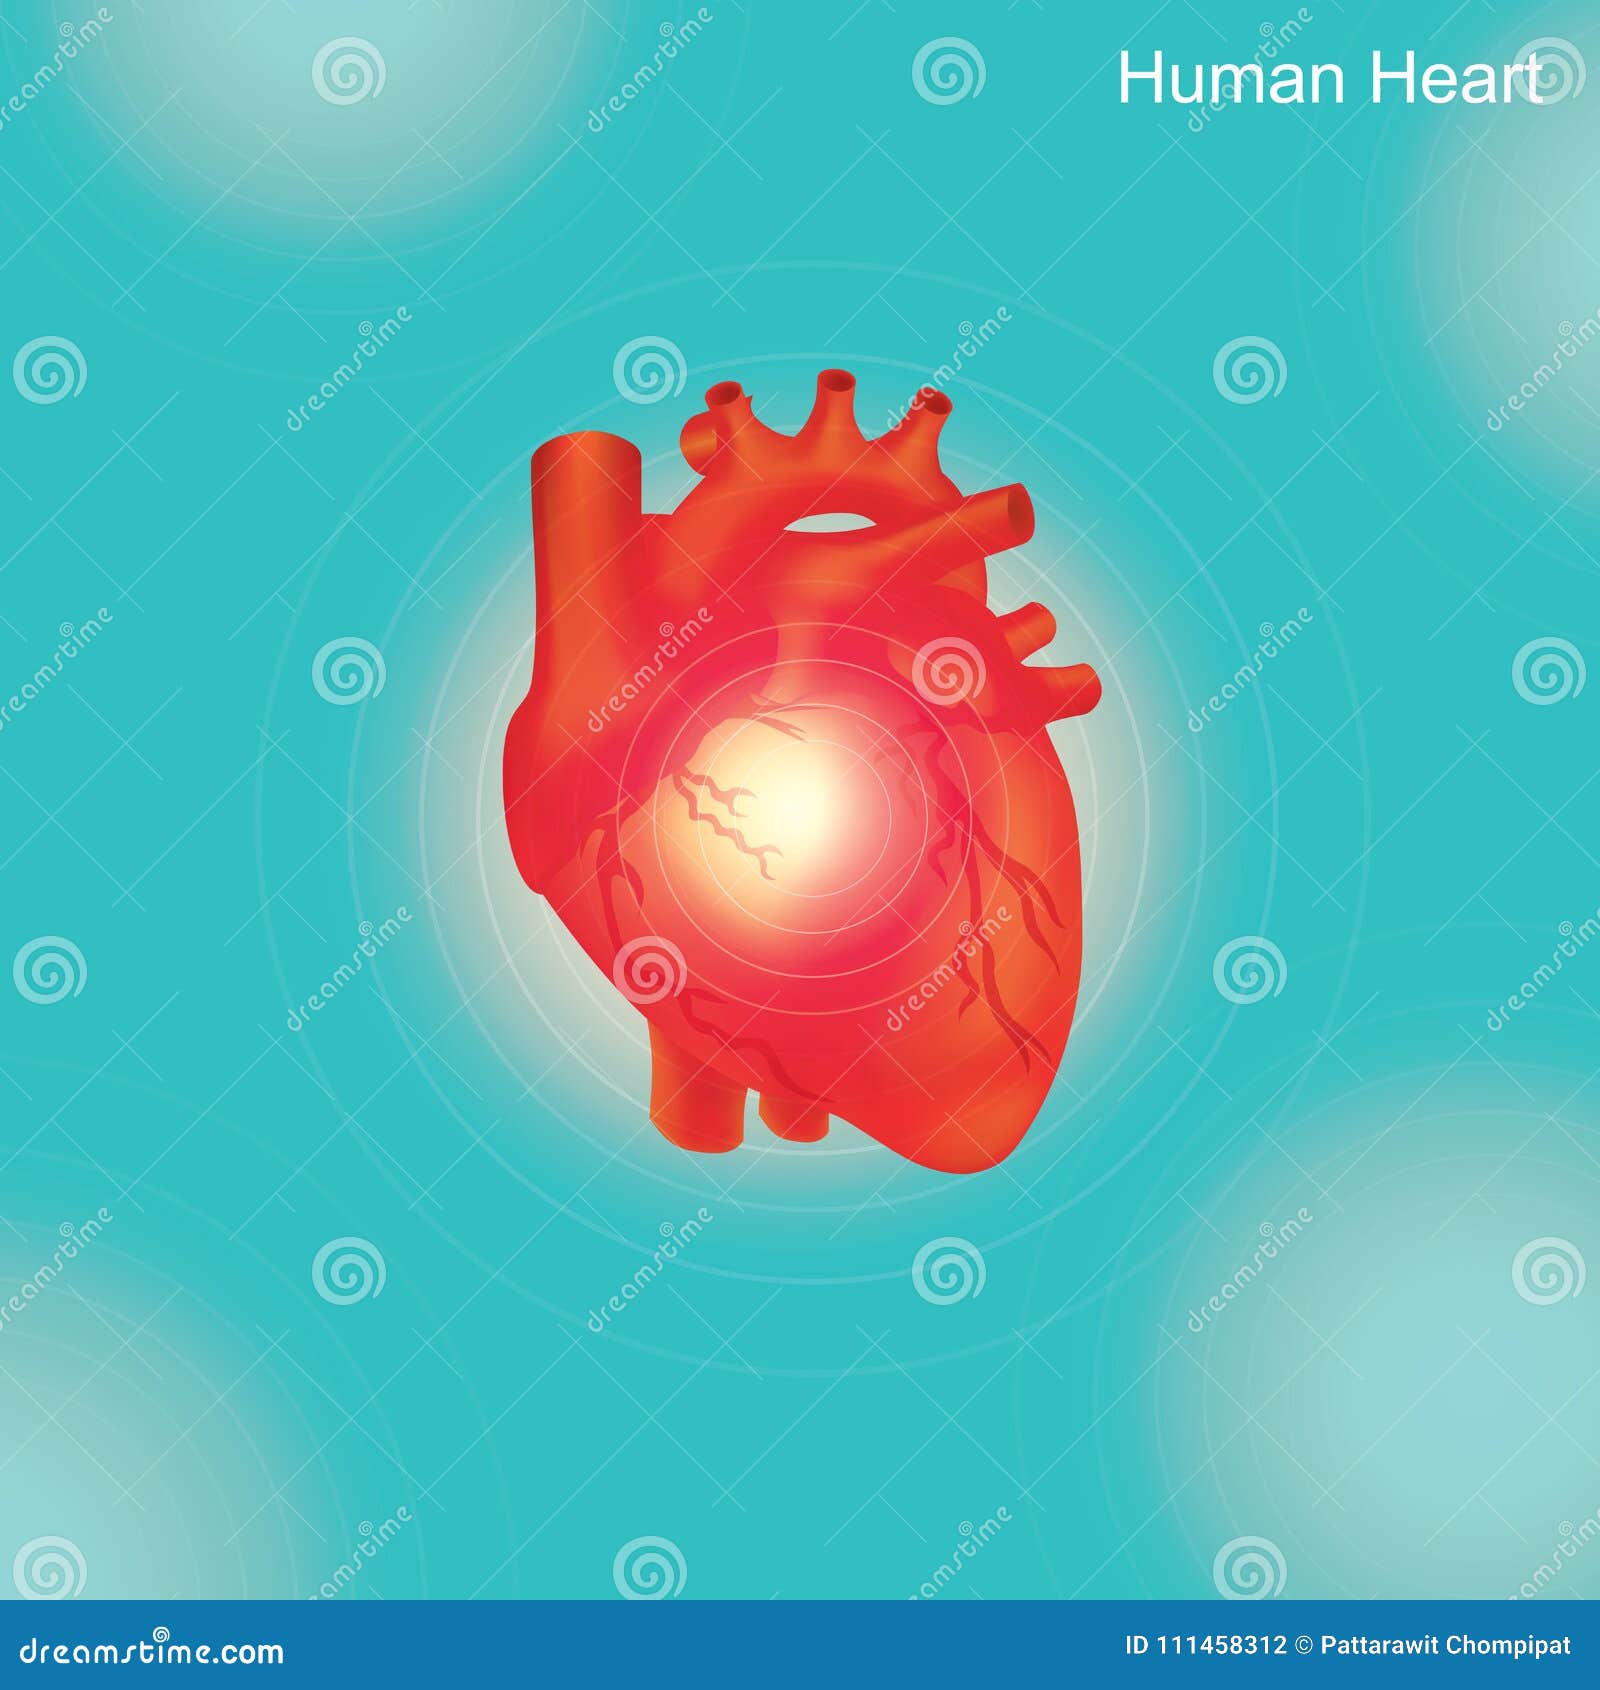 human heart.angioplasty is an endovascular procedure to widen narrowed or ob